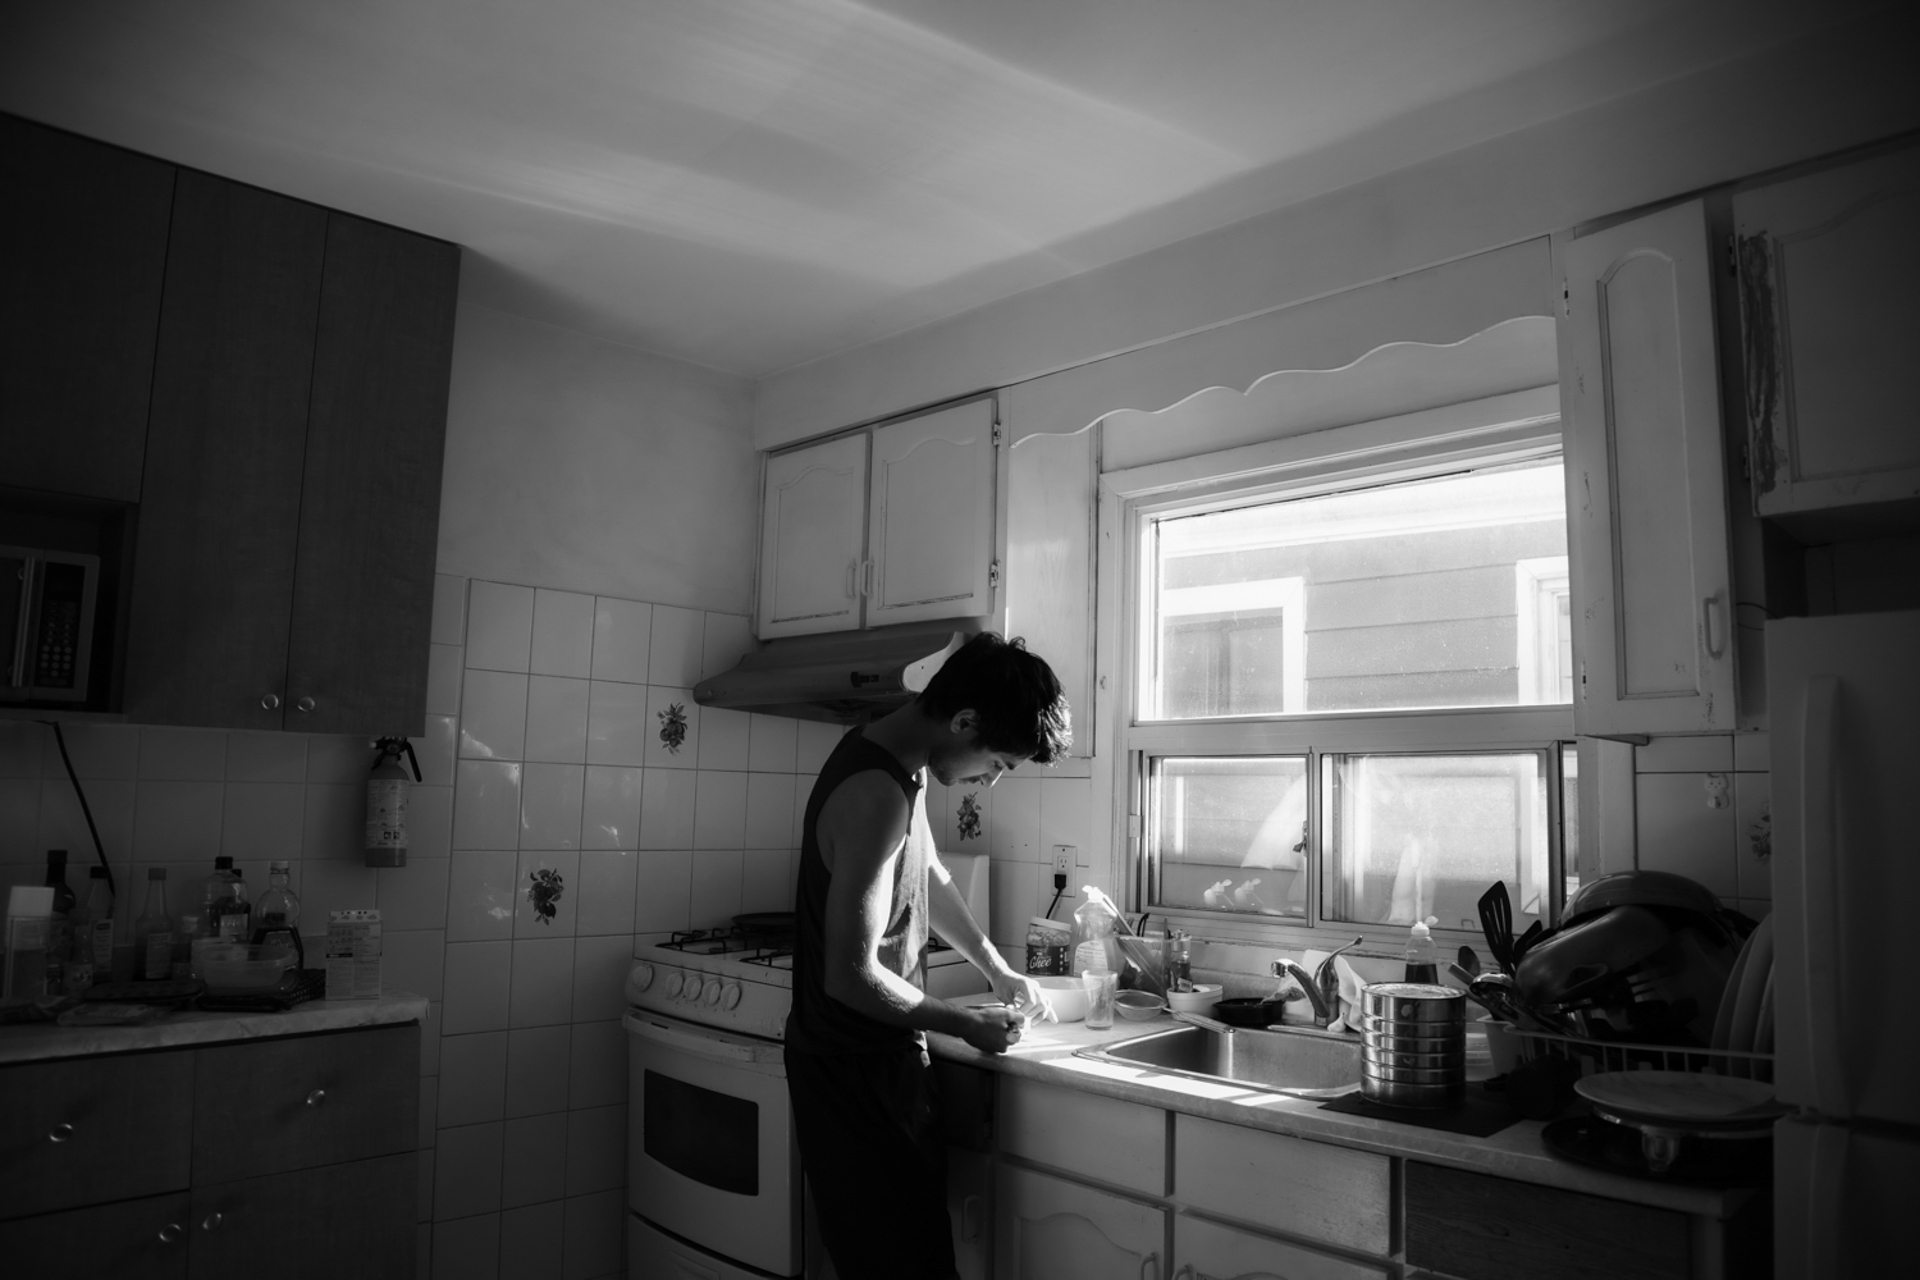 This photo consists of a man in a brightly lit kitchen preparing something to eat. He has short black hair and is wearing a sleeveless tank-top and pants. The photo is black and white.